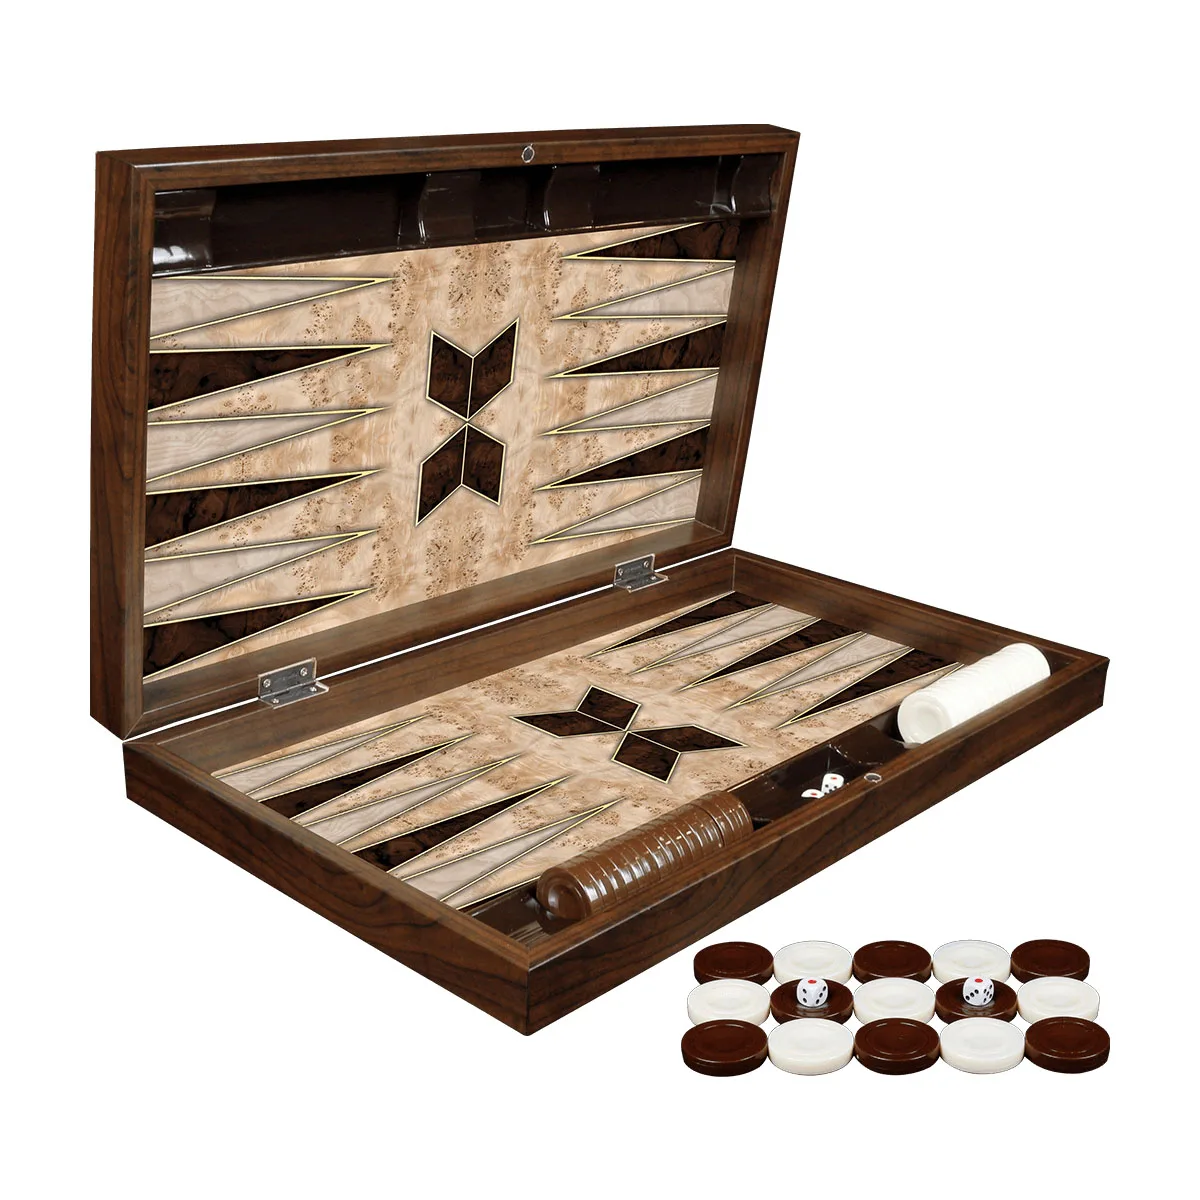 Luxury Backgammon Board Game Set Wooden Geometric Walnut - With Chips & Dices - Gift For Parents Friend-Checkers Pieces Stones